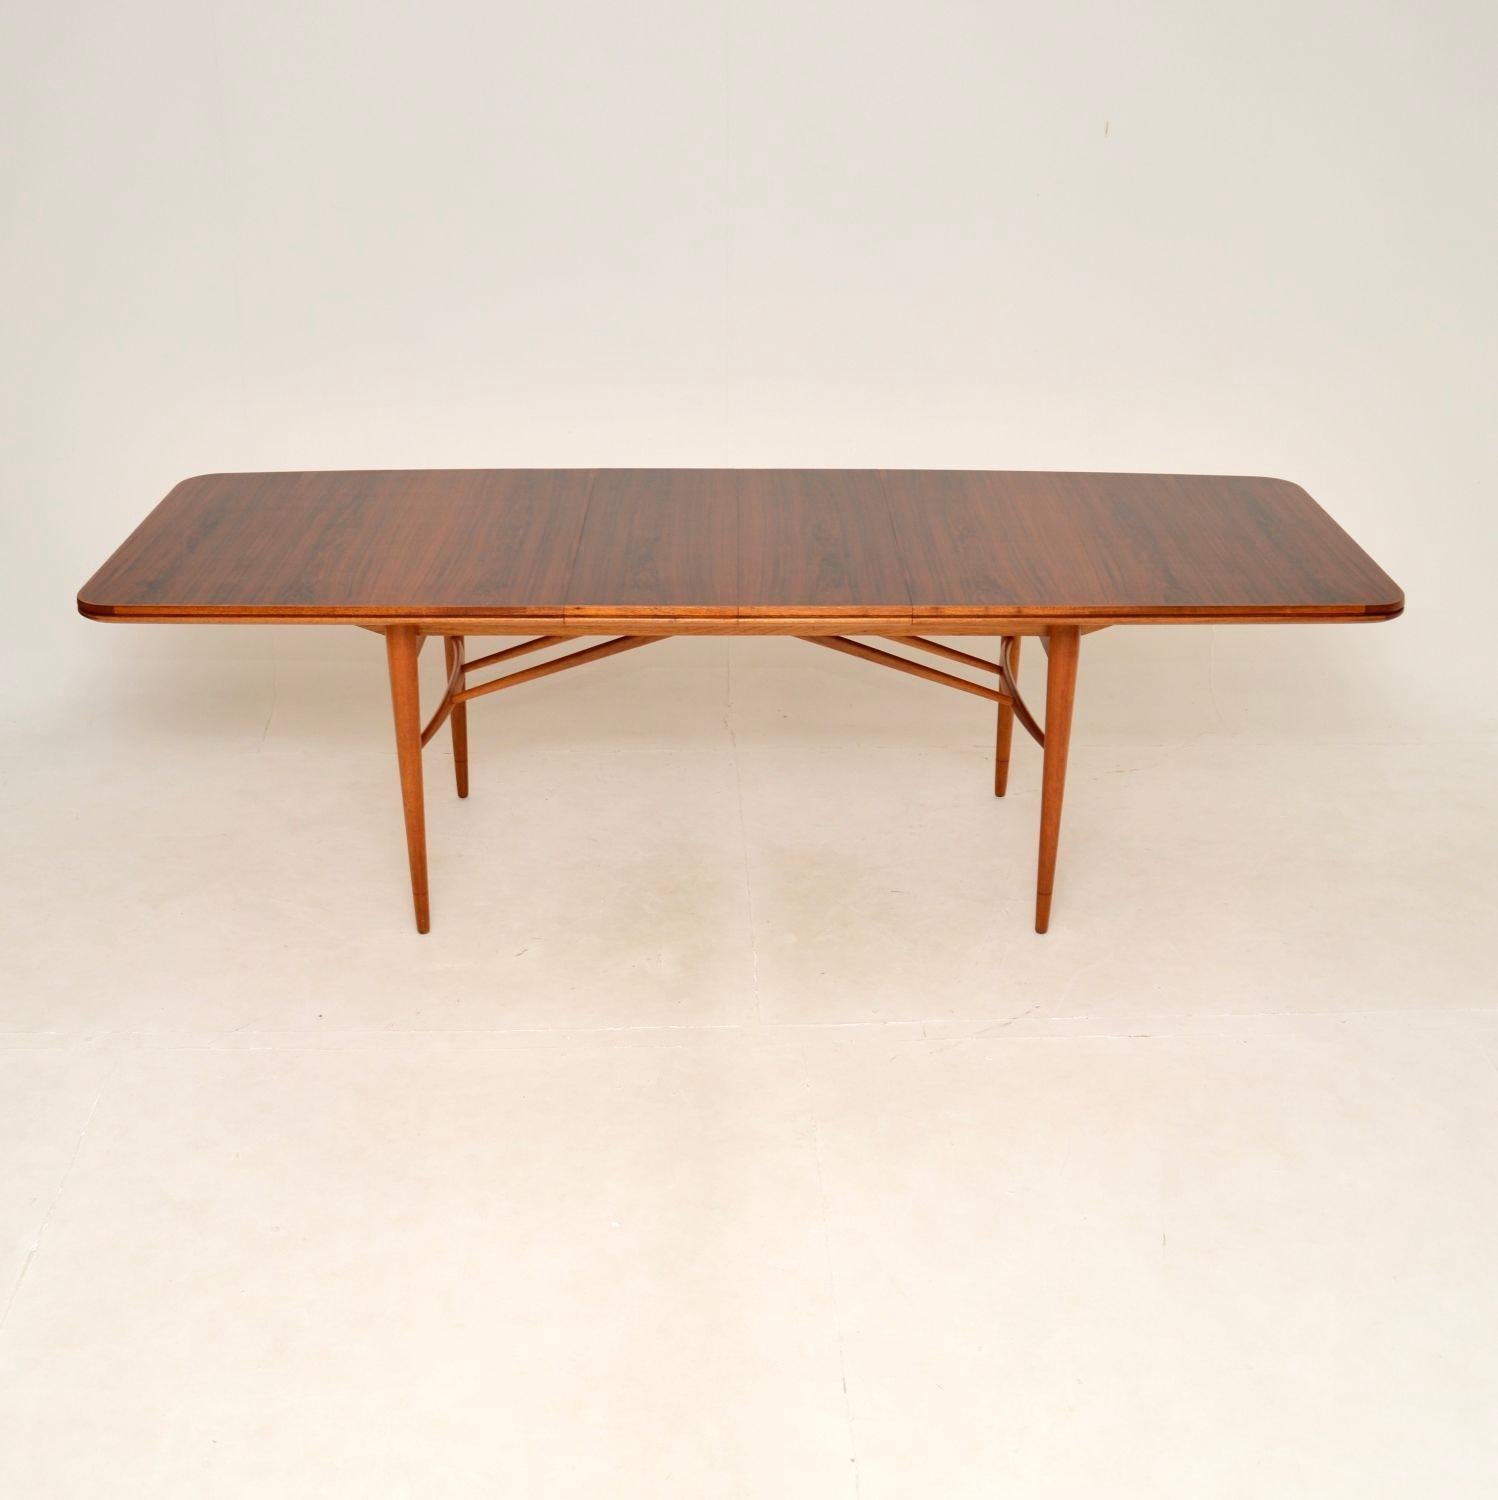 British Vintage Dining Table by Robert Heritage for Archie Shine